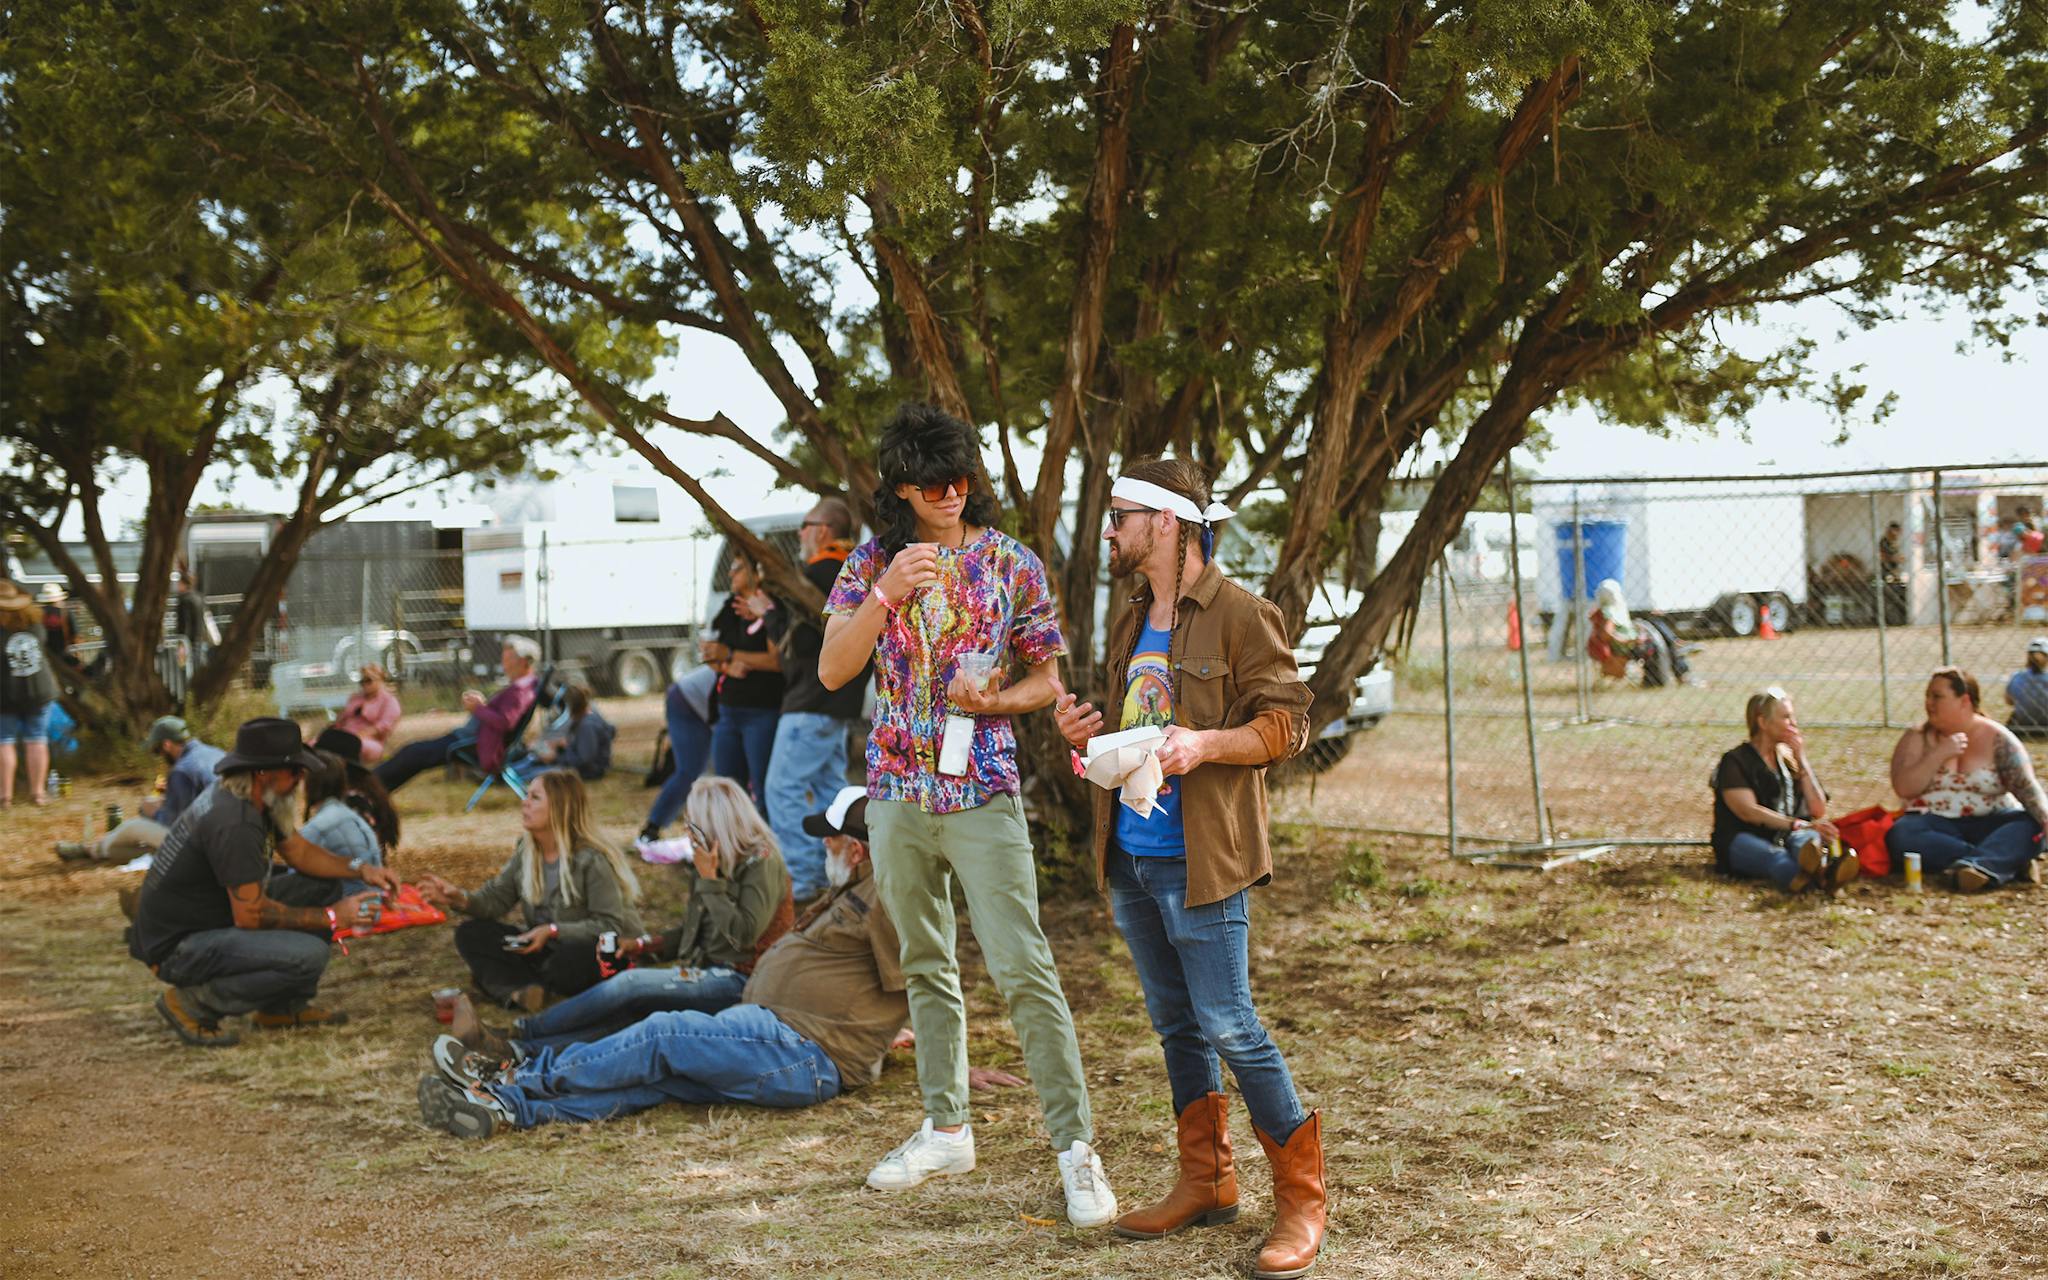 Several festivalgoers sported seventies- and Western-inspired looks, including one fan who drew inspiration from Nelson’s trademark braids.